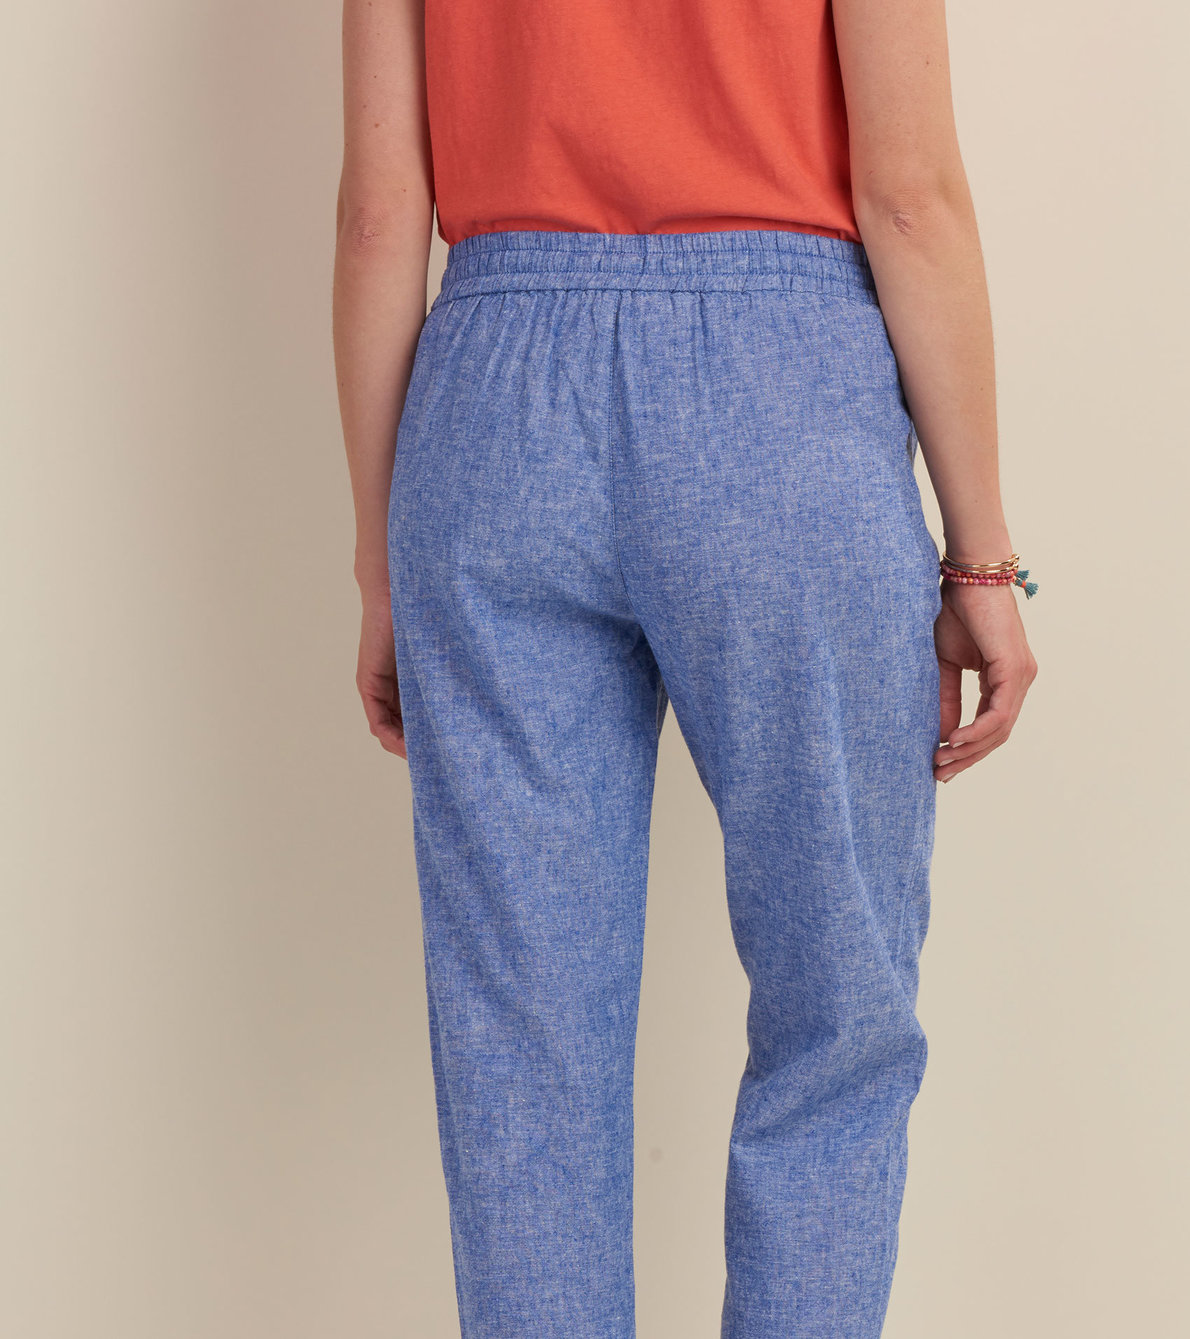 View larger image of Sierra Cotton Linen Pants - Chambray